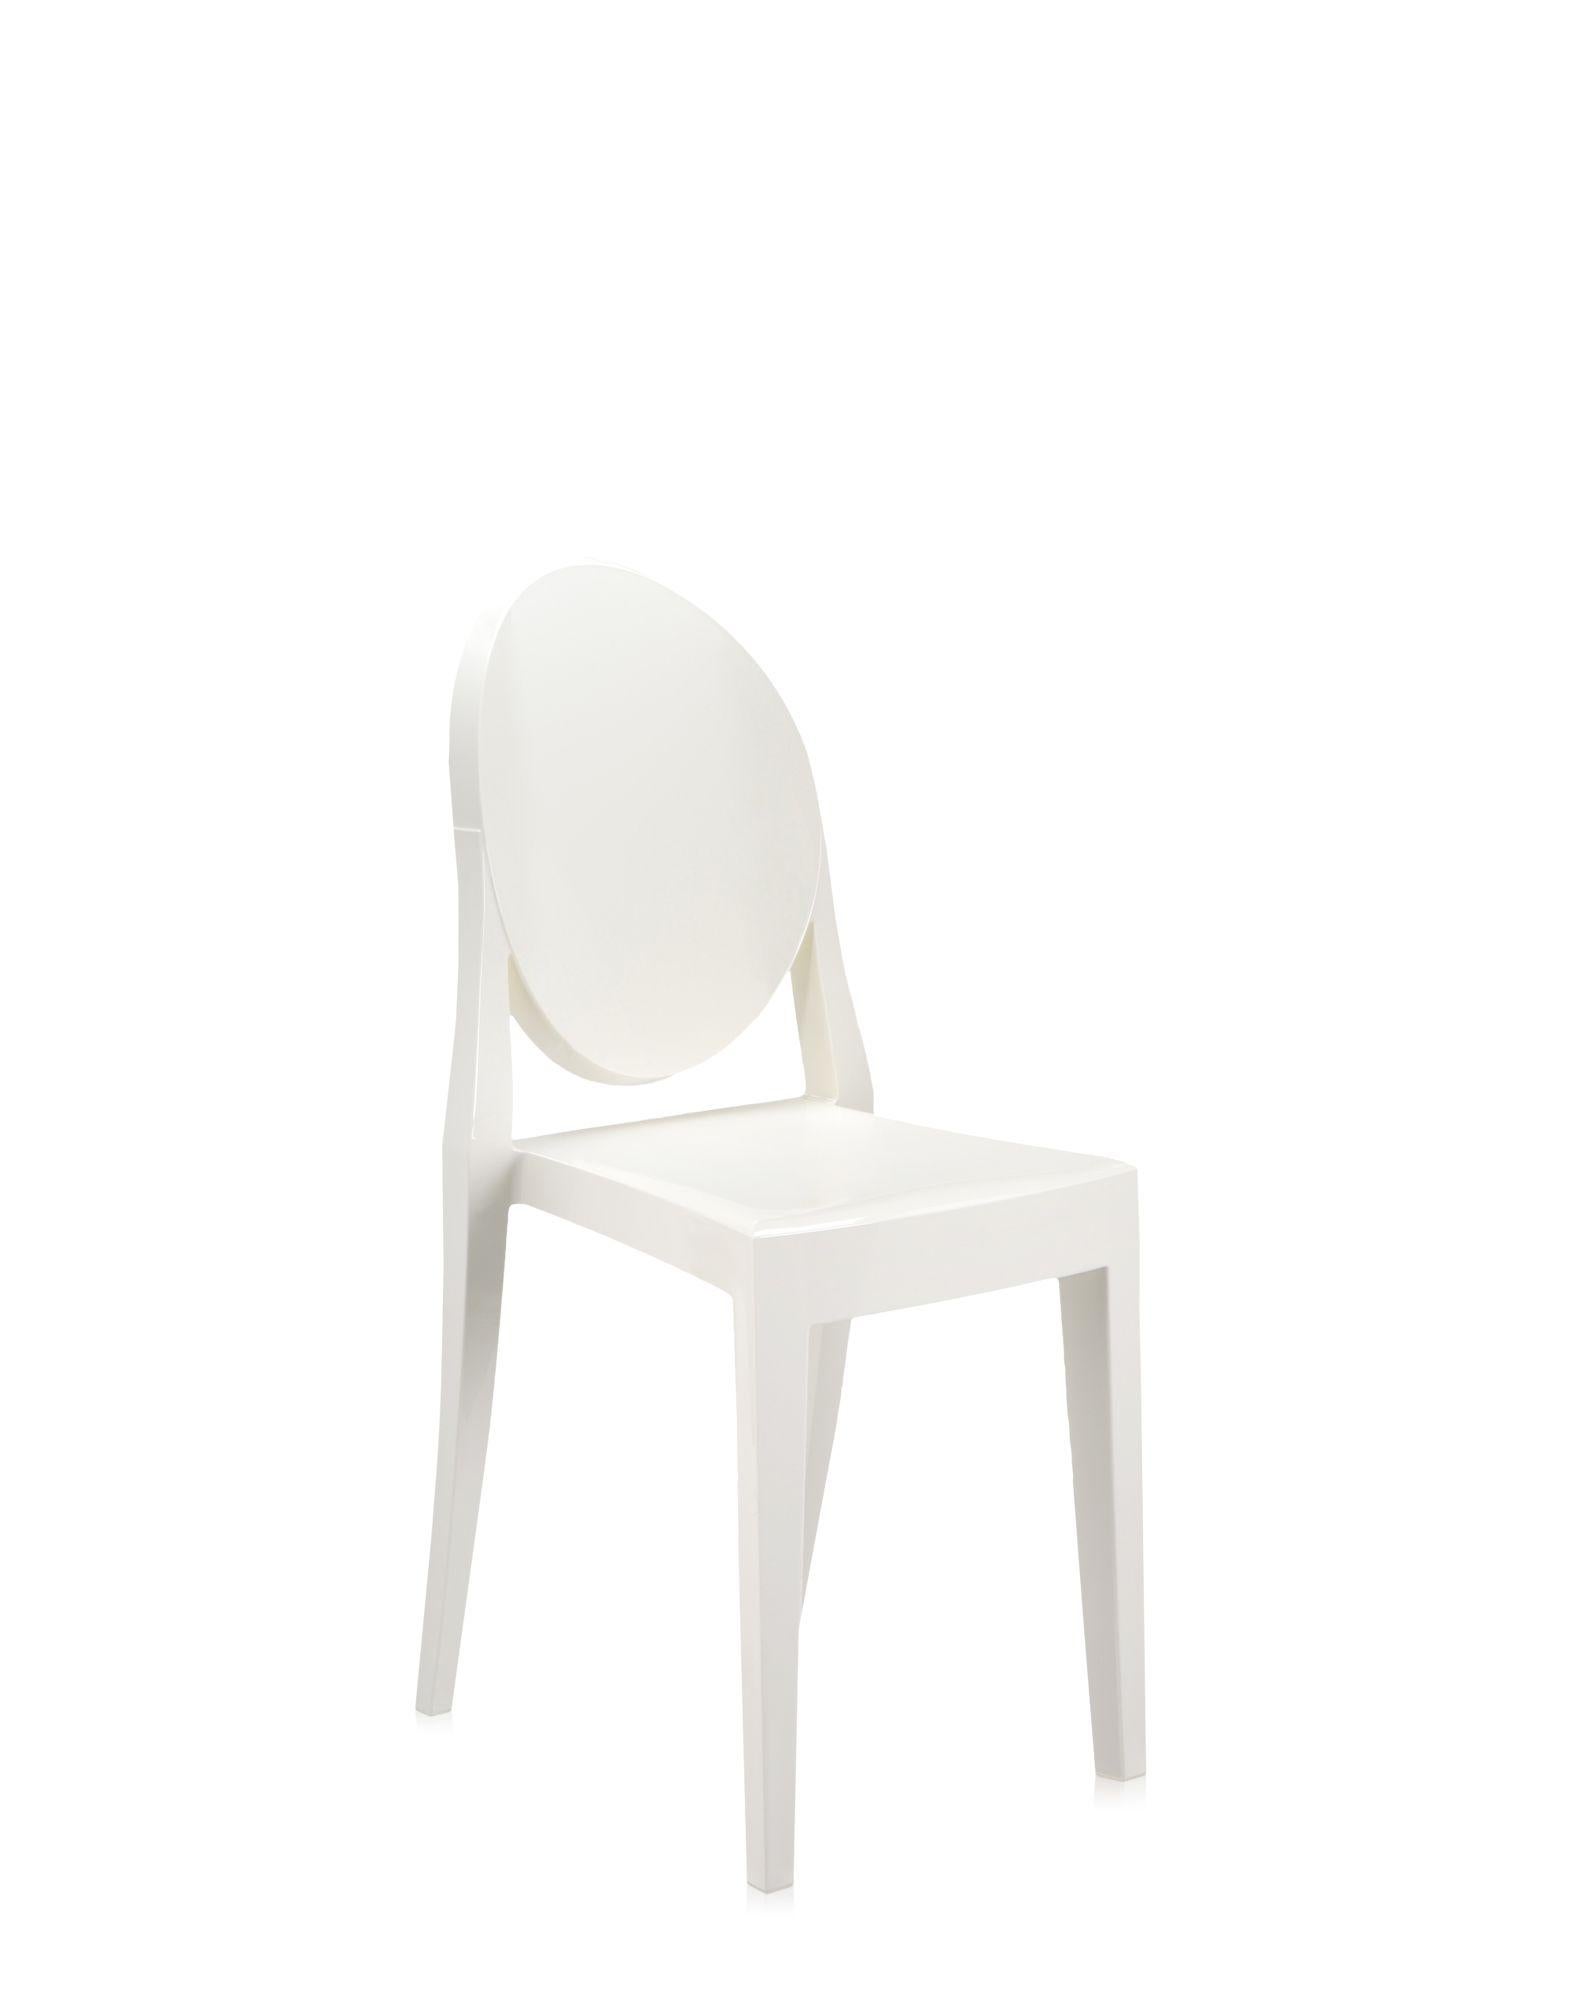 This is a chair born of classic lines with a rounded backrest that recalls the shape of antique medallions, whilst the seat is linear and geometric. Victoria ghost is made of transparent, colored polycarbonate and formed in a single injection mould.